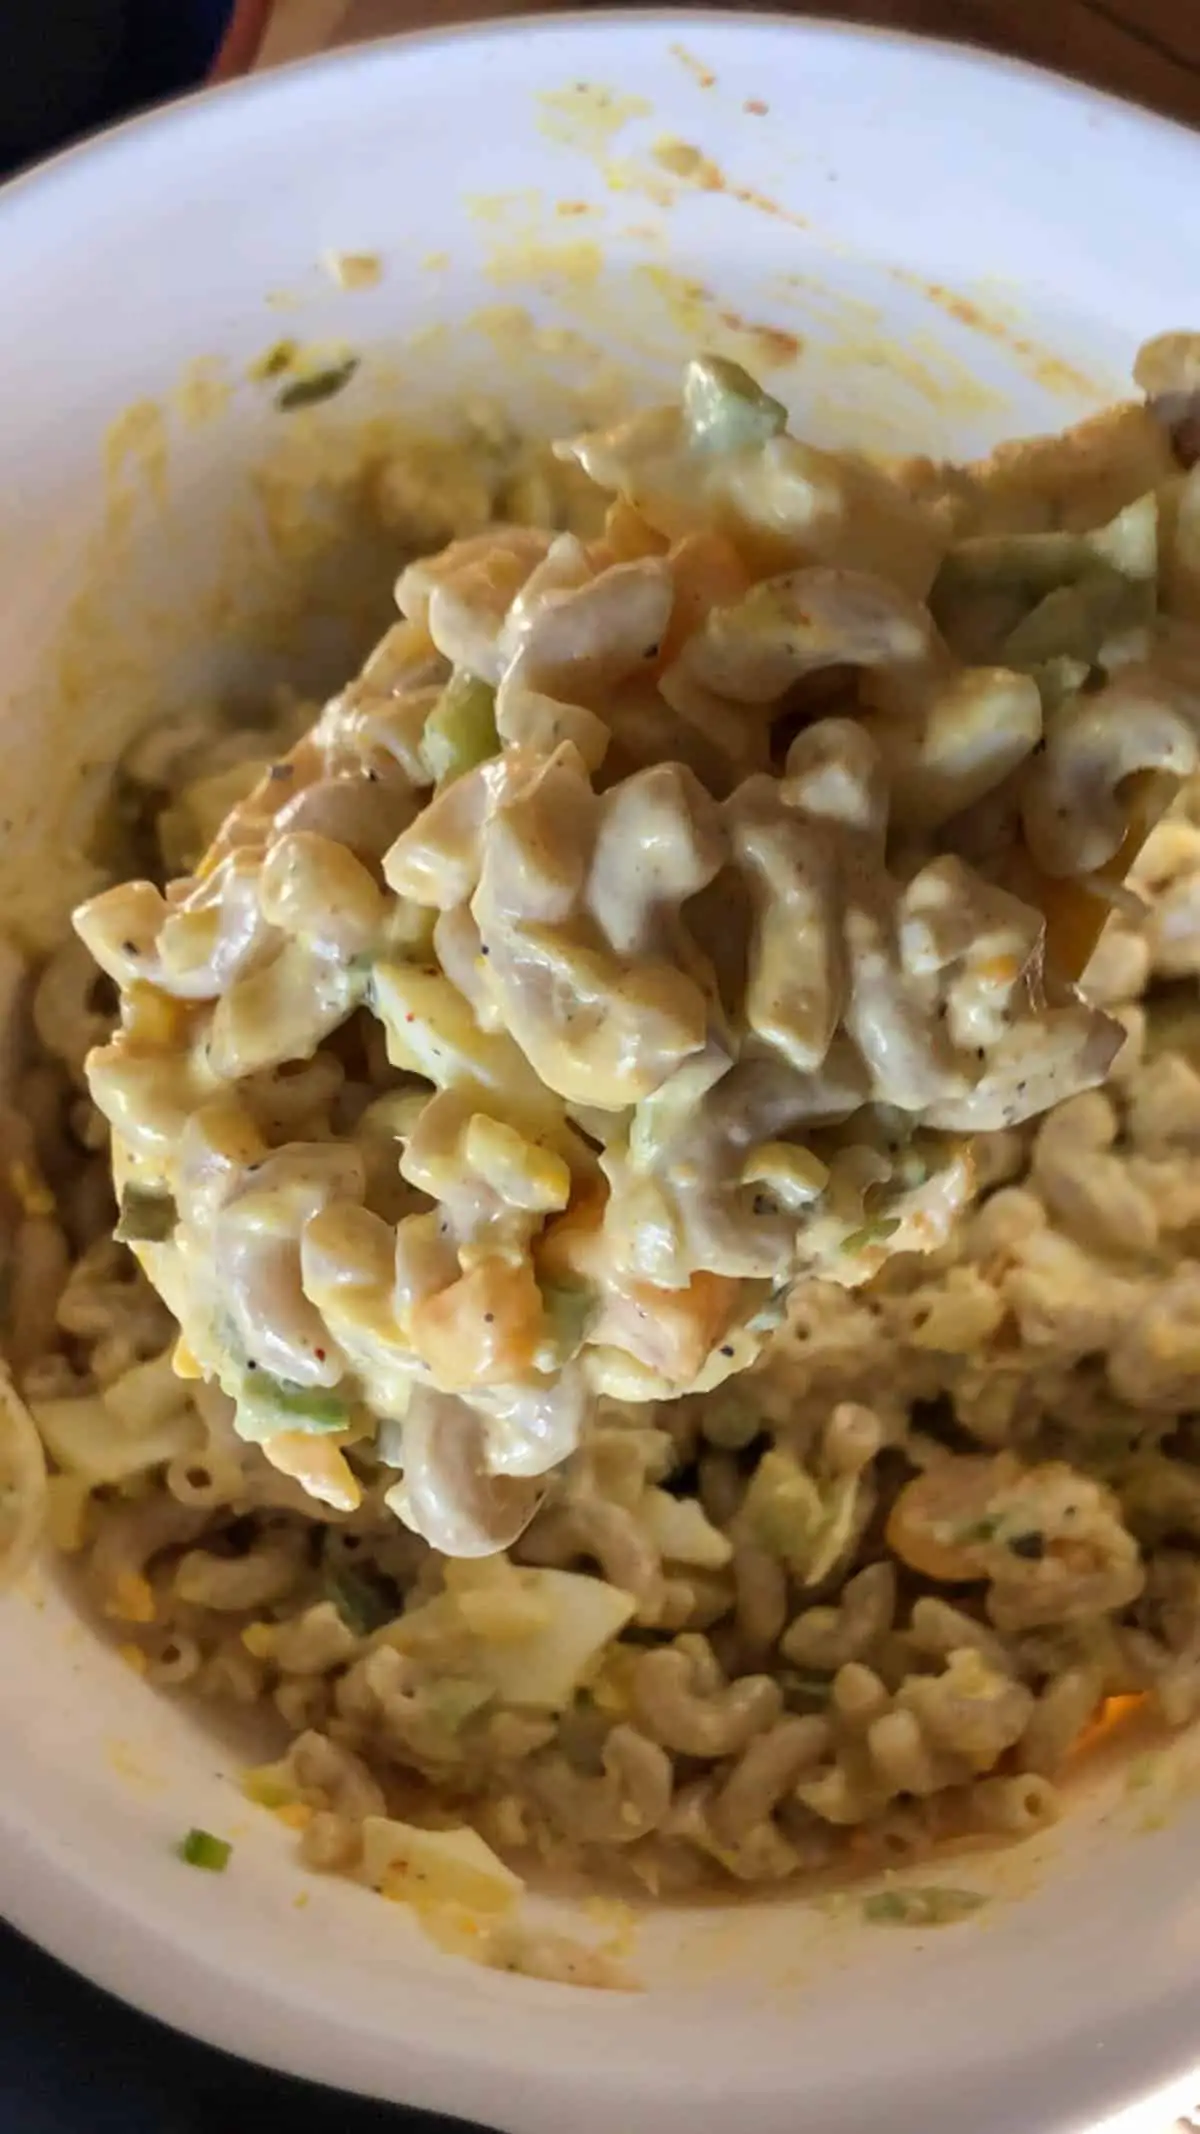 Macaroni, chopped hard boiled eggs, and chopped green peppers coated with mayonnaise and mustard in a white mixing bowl with a spoon containing this macaroni in the foreground.